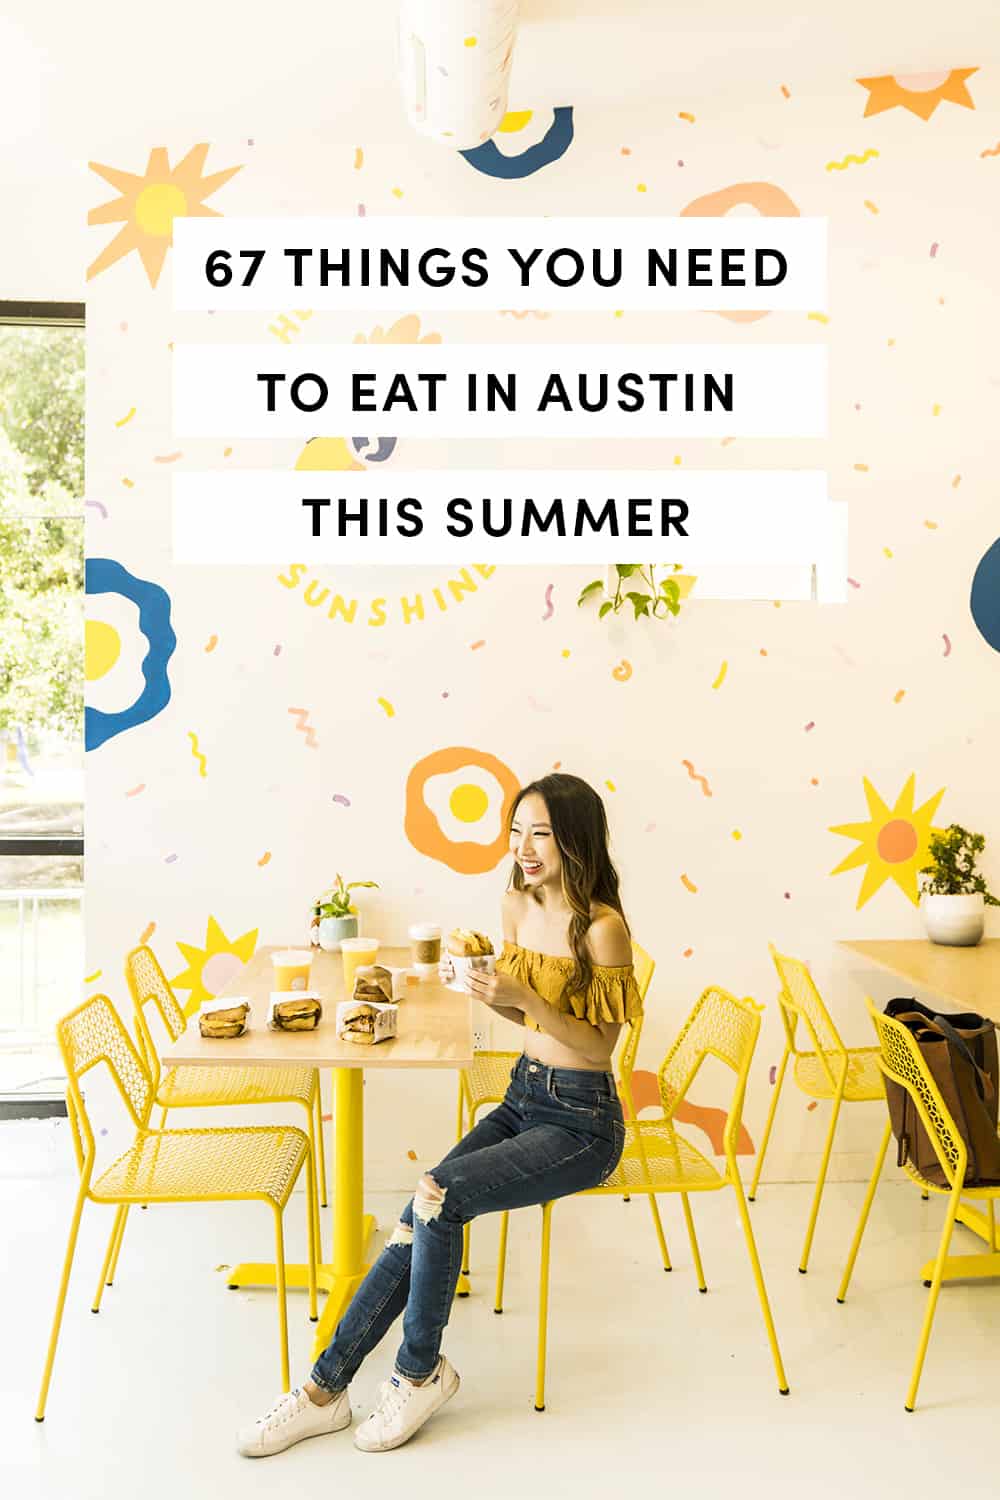 67 Things You Need To Eat In Austin This Summer